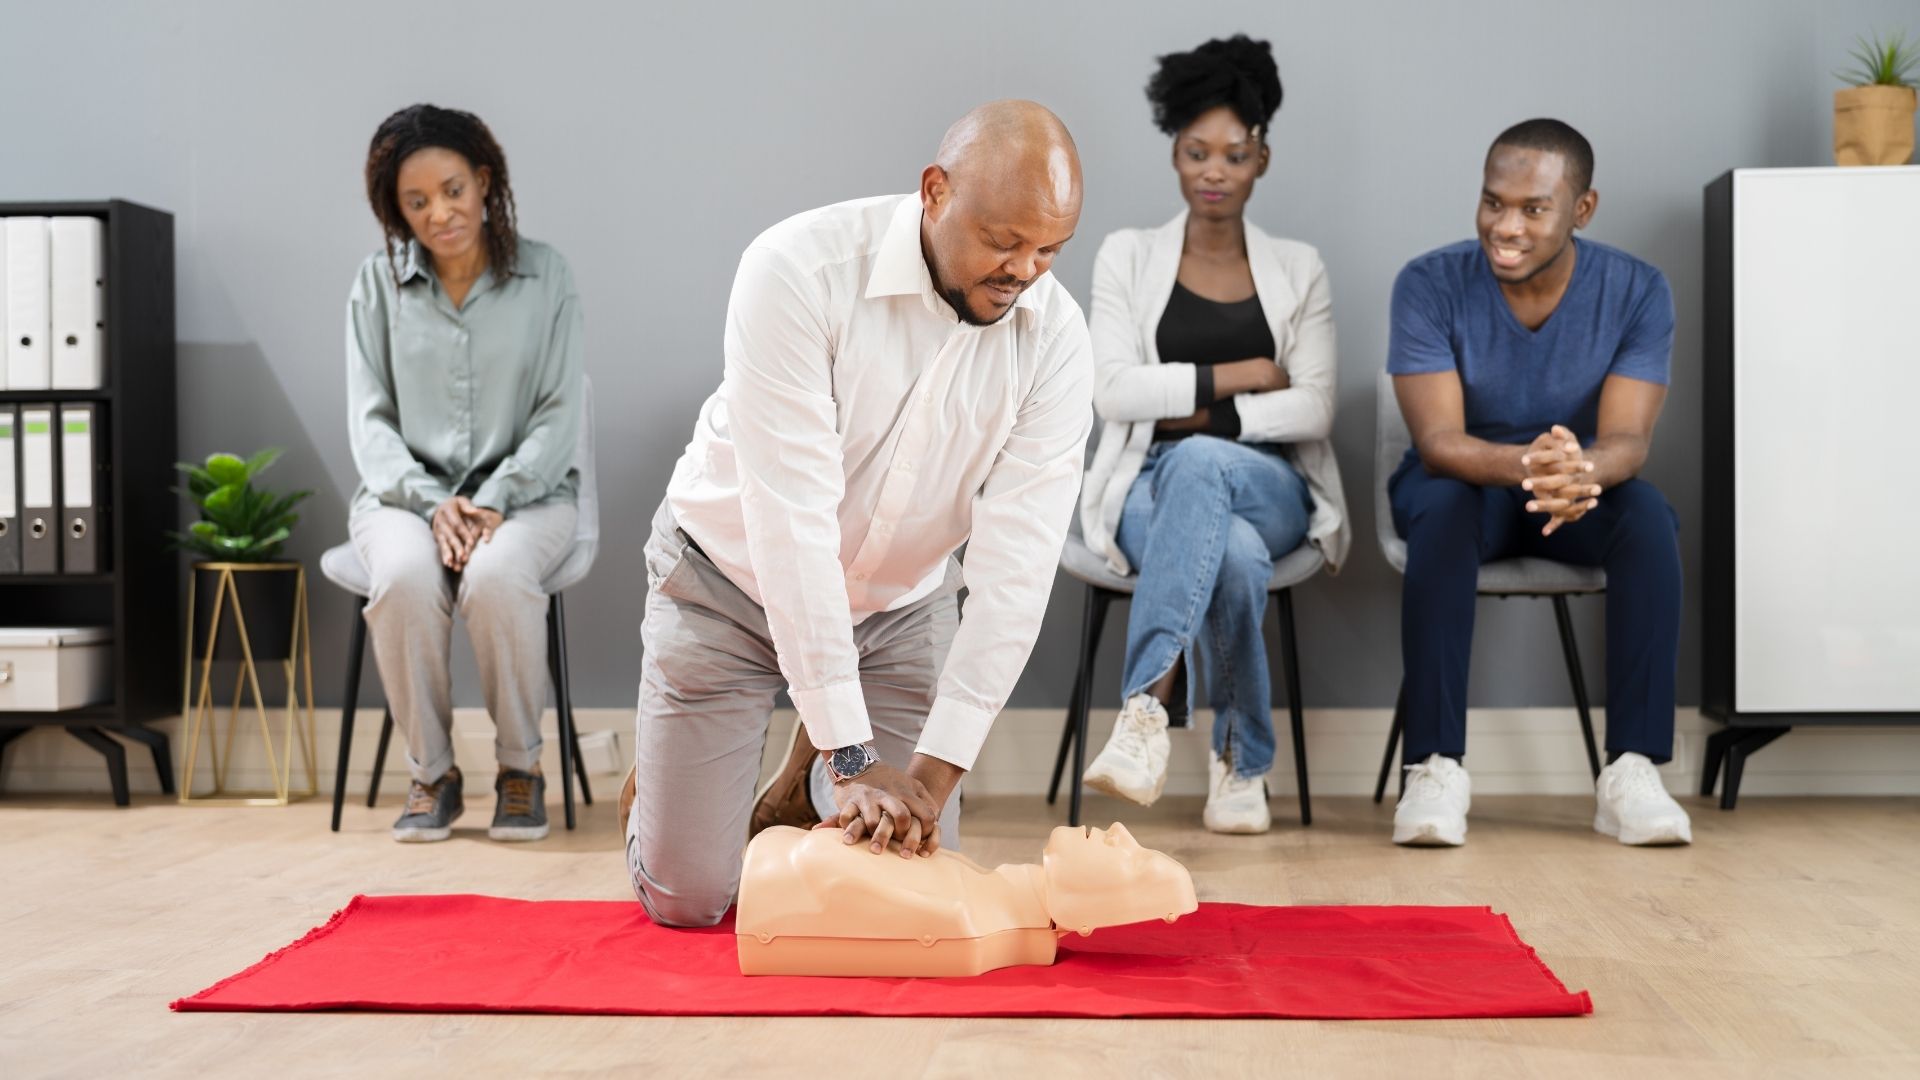 When Should You Not Perform CPR